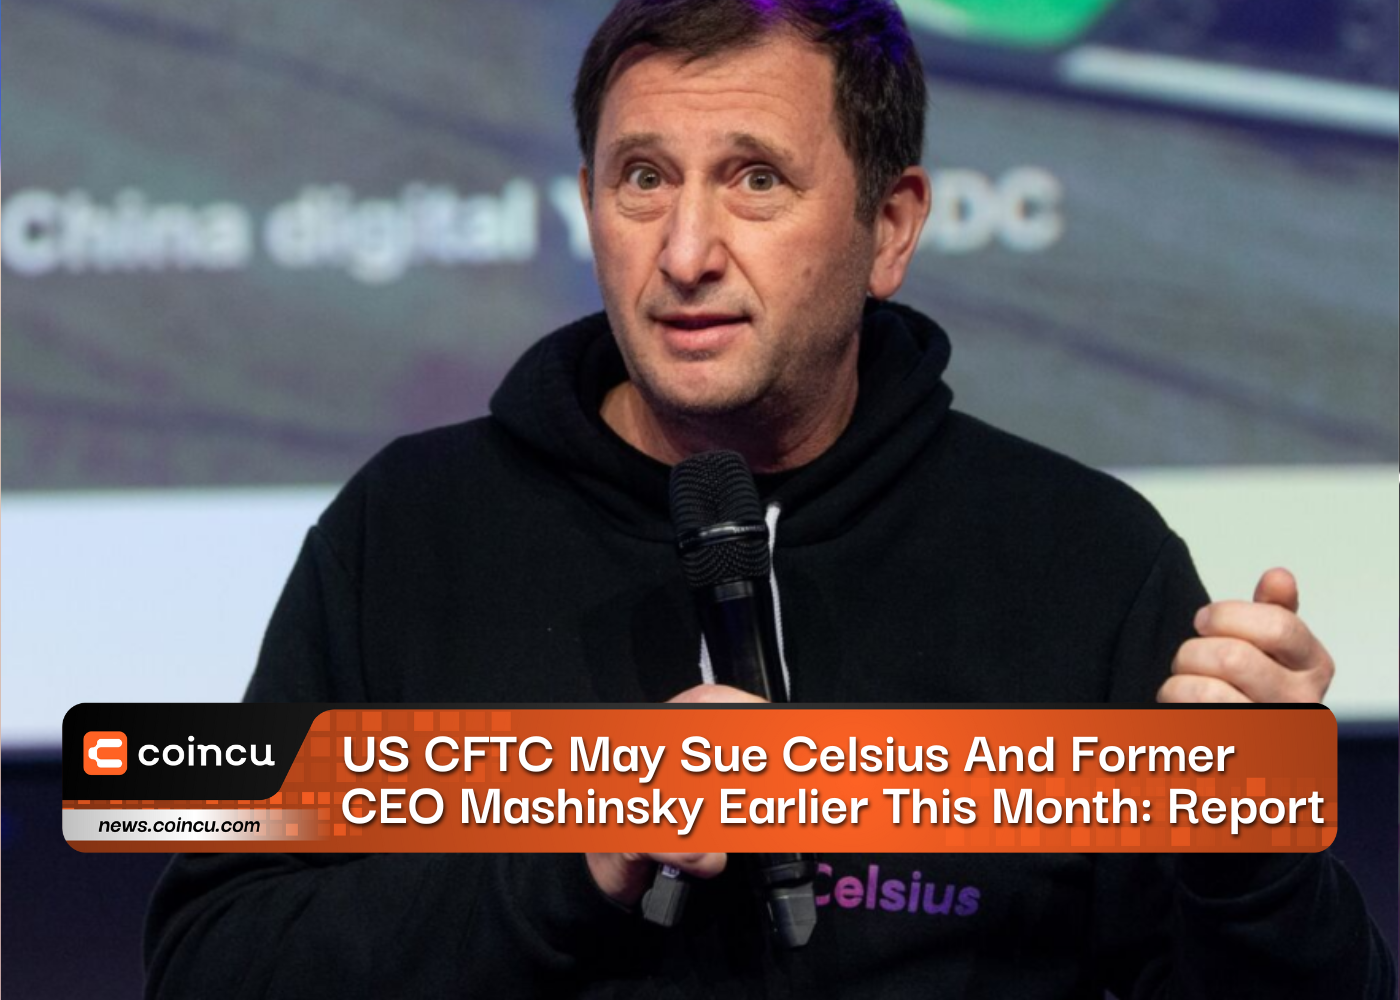 US CFTC May Sue Celsius And Former CEO Mashinsky Earlier This Month: Report